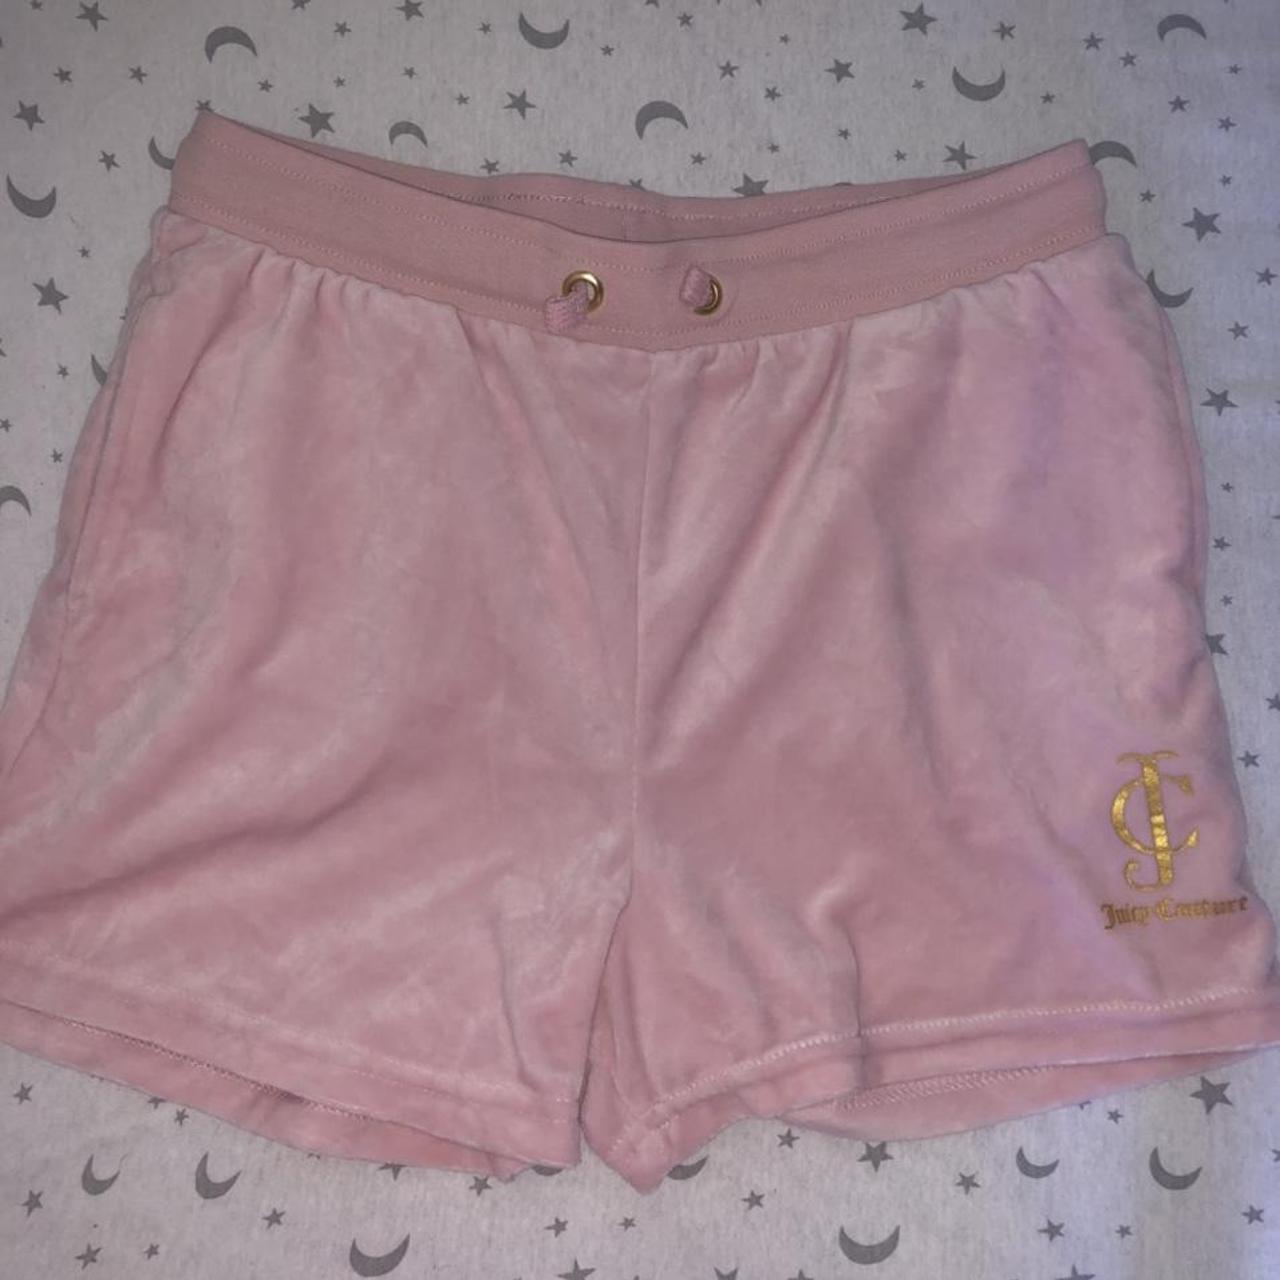 Juicy couture pink velour shorts New with tags... - Depop